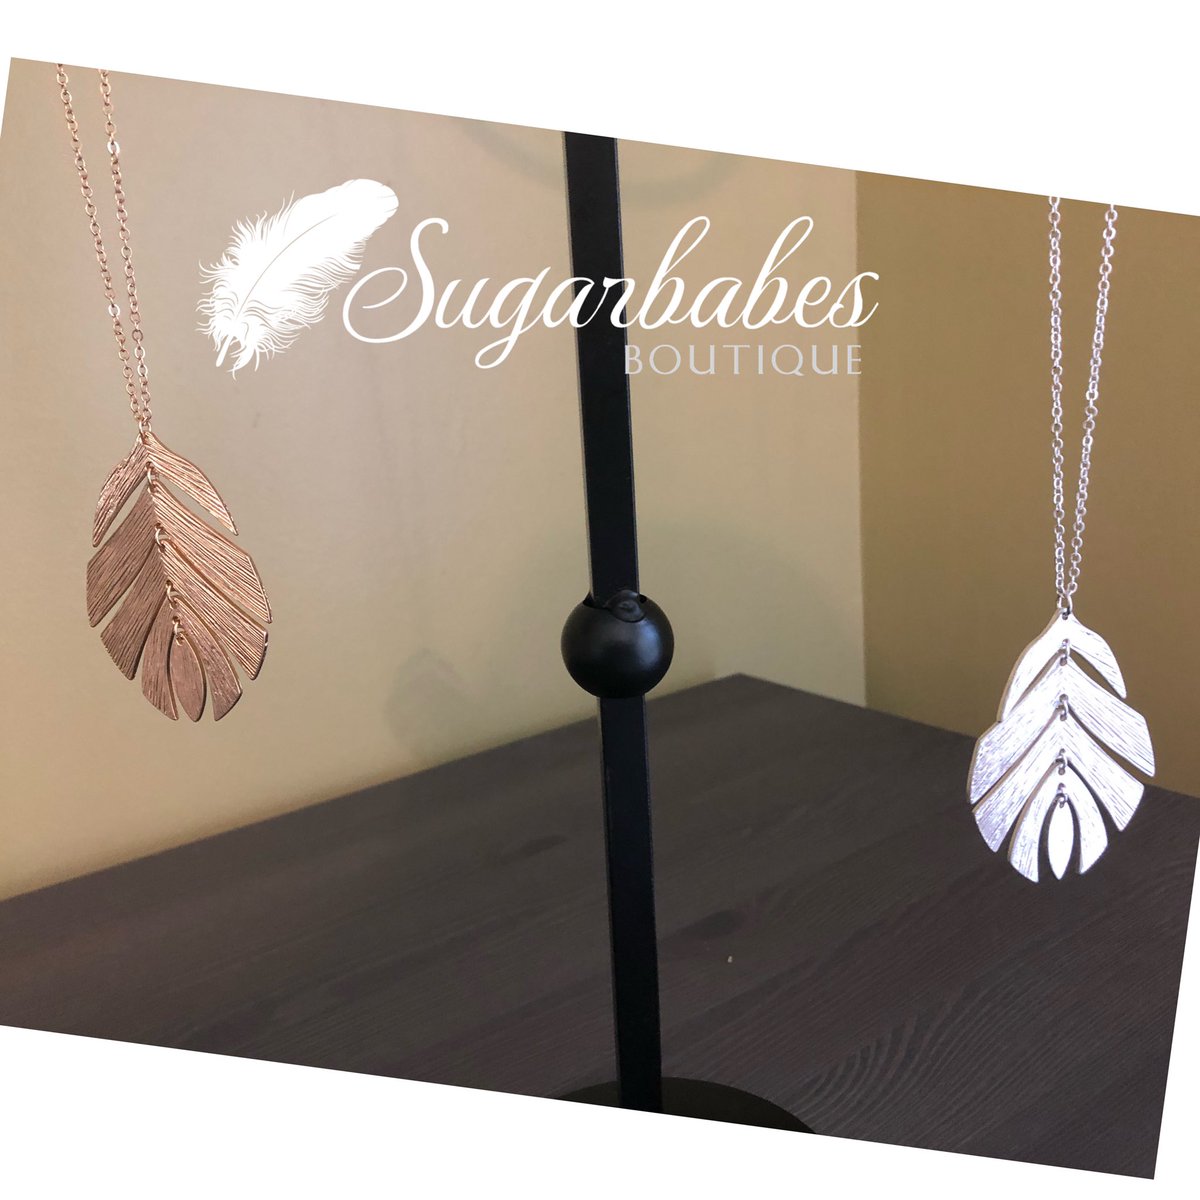 Leaf necklaces in gold & silver. 😍 {$12} #sugarbabesboutique #leafnecklace #silverandgold #spiceupyouroutfit #boutique #boutiqueshopping #indyboutiques